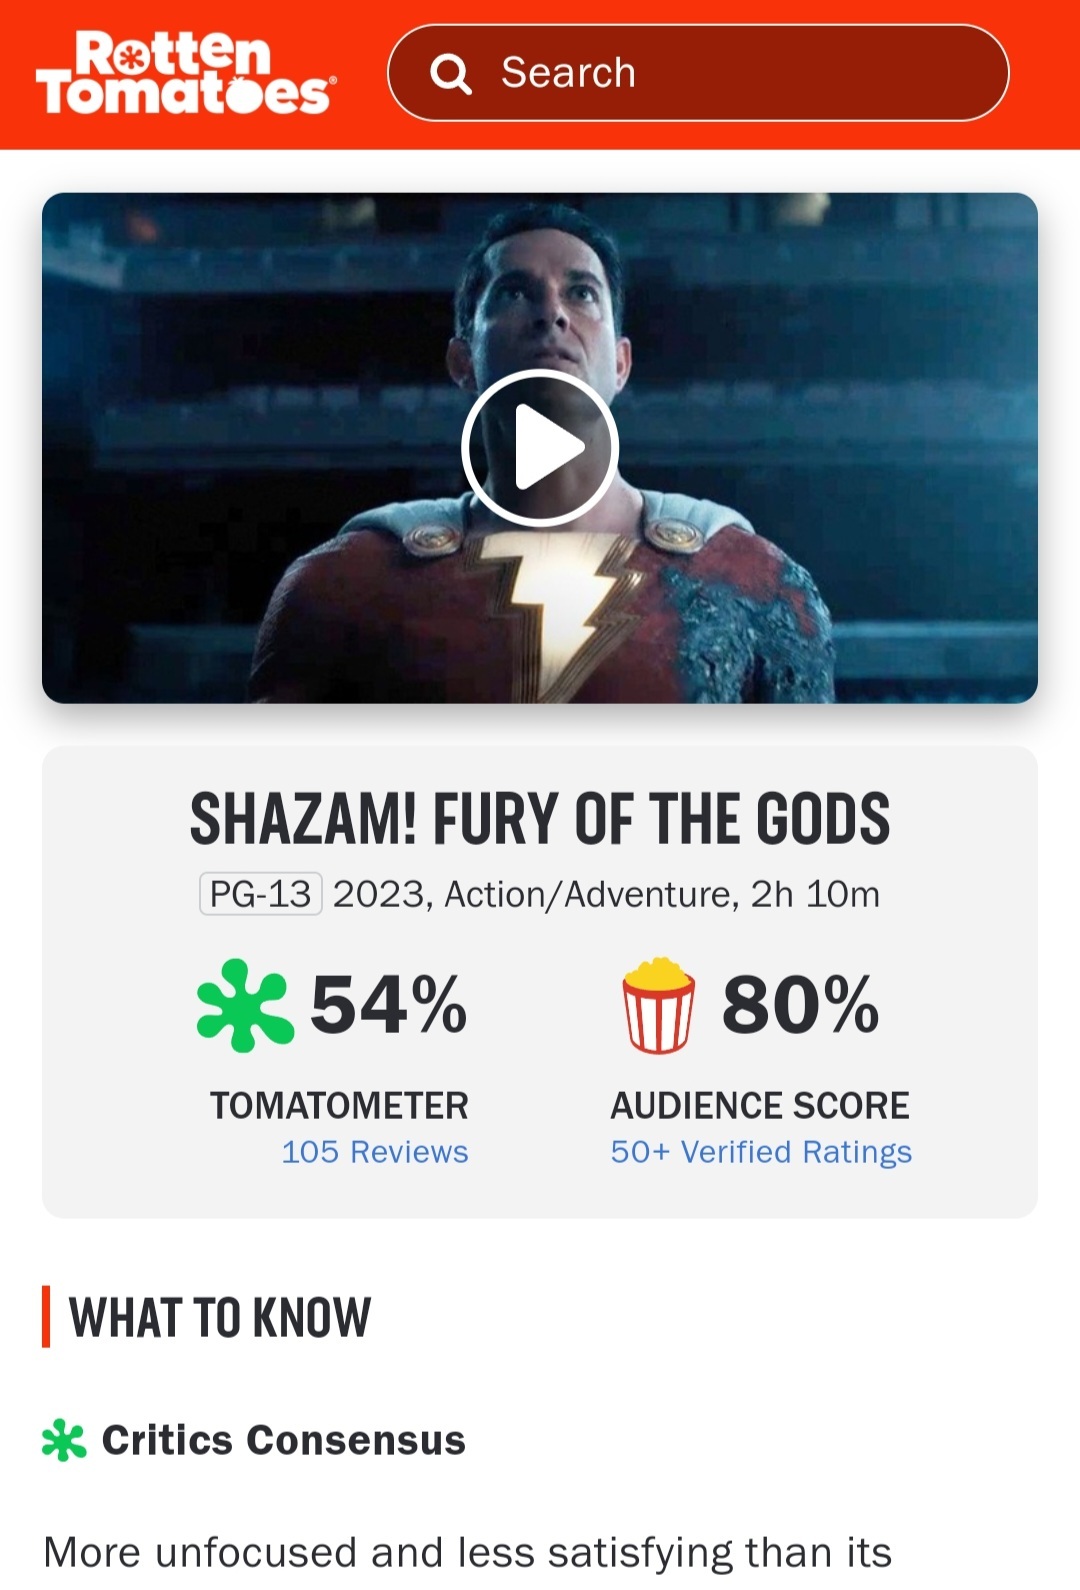 SHAZAM!2 ratings in free-fall plunge - Gen. Discussion - Comic Vine